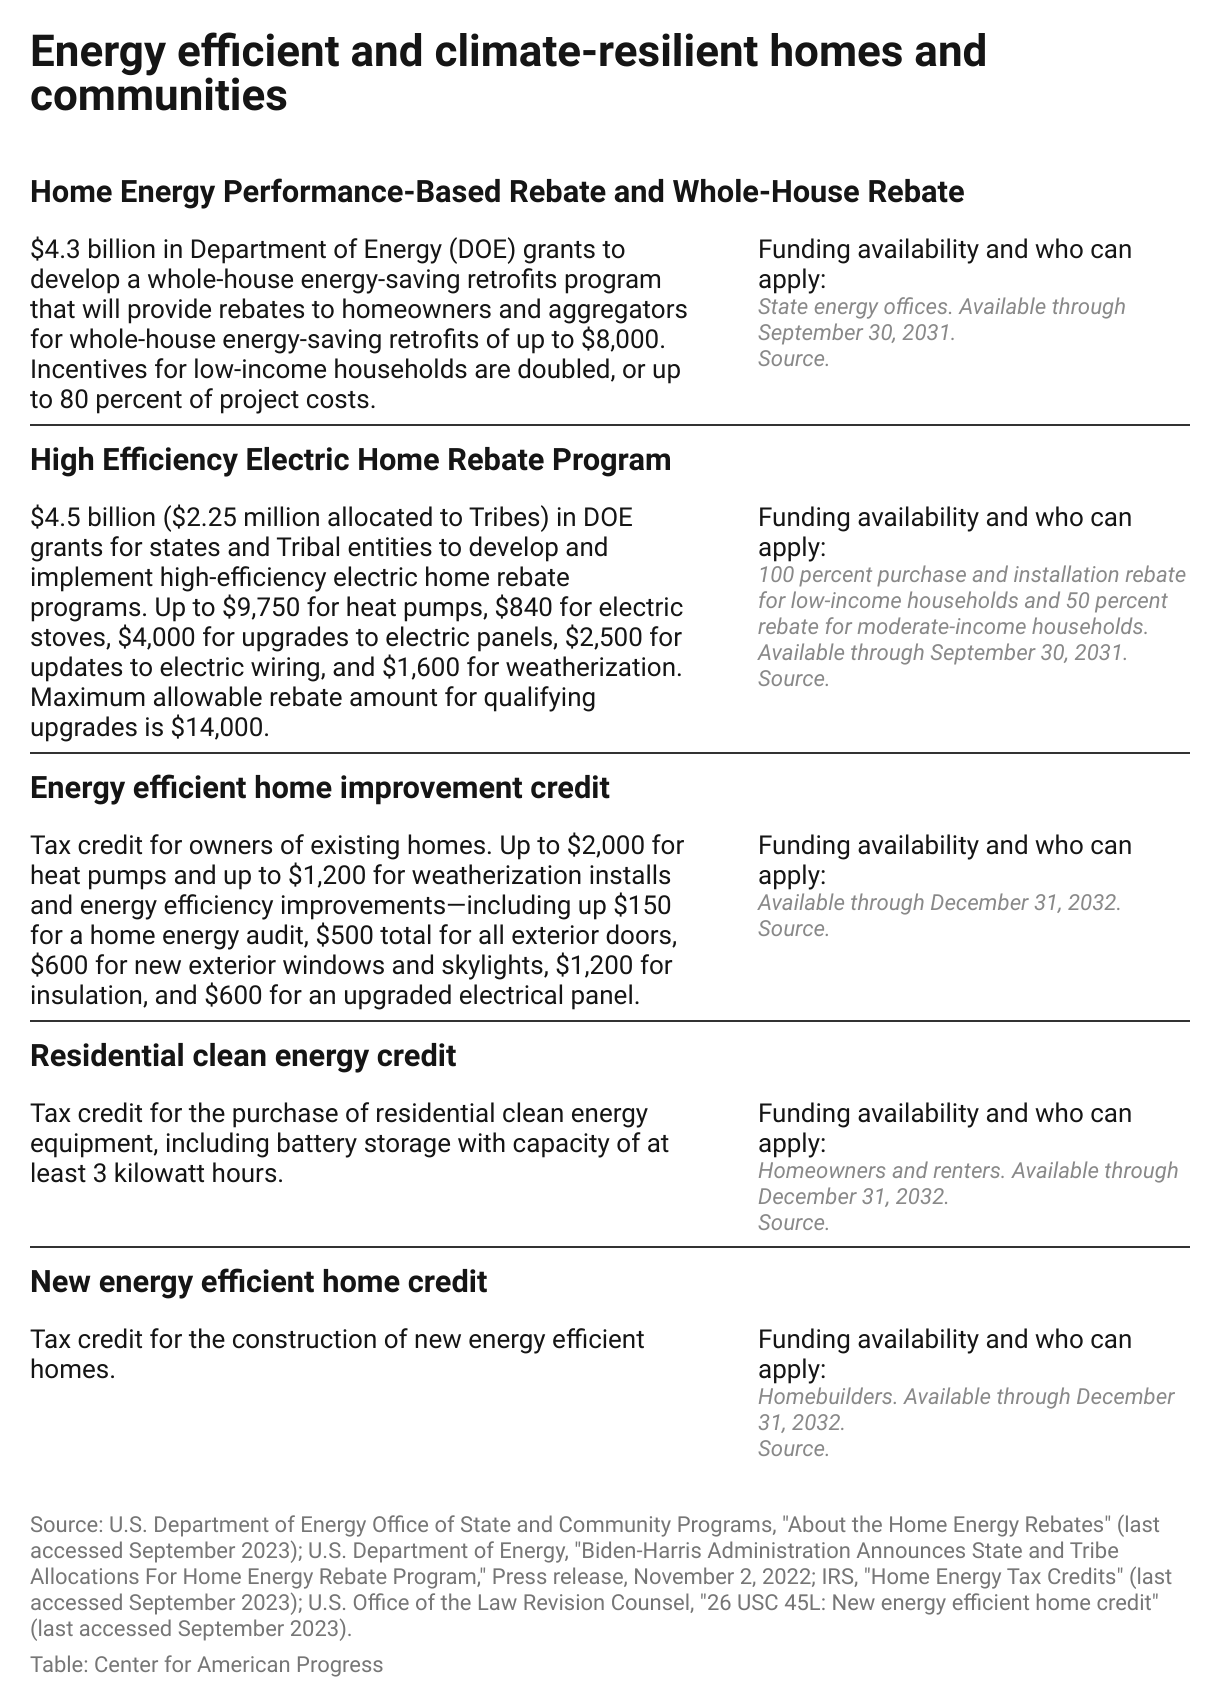 A table describing the Inflation Reduction Act funding opportunities to help update and build energy efficient and climate-resilient homes in Florida, how long these funds will be available, and who can apply.